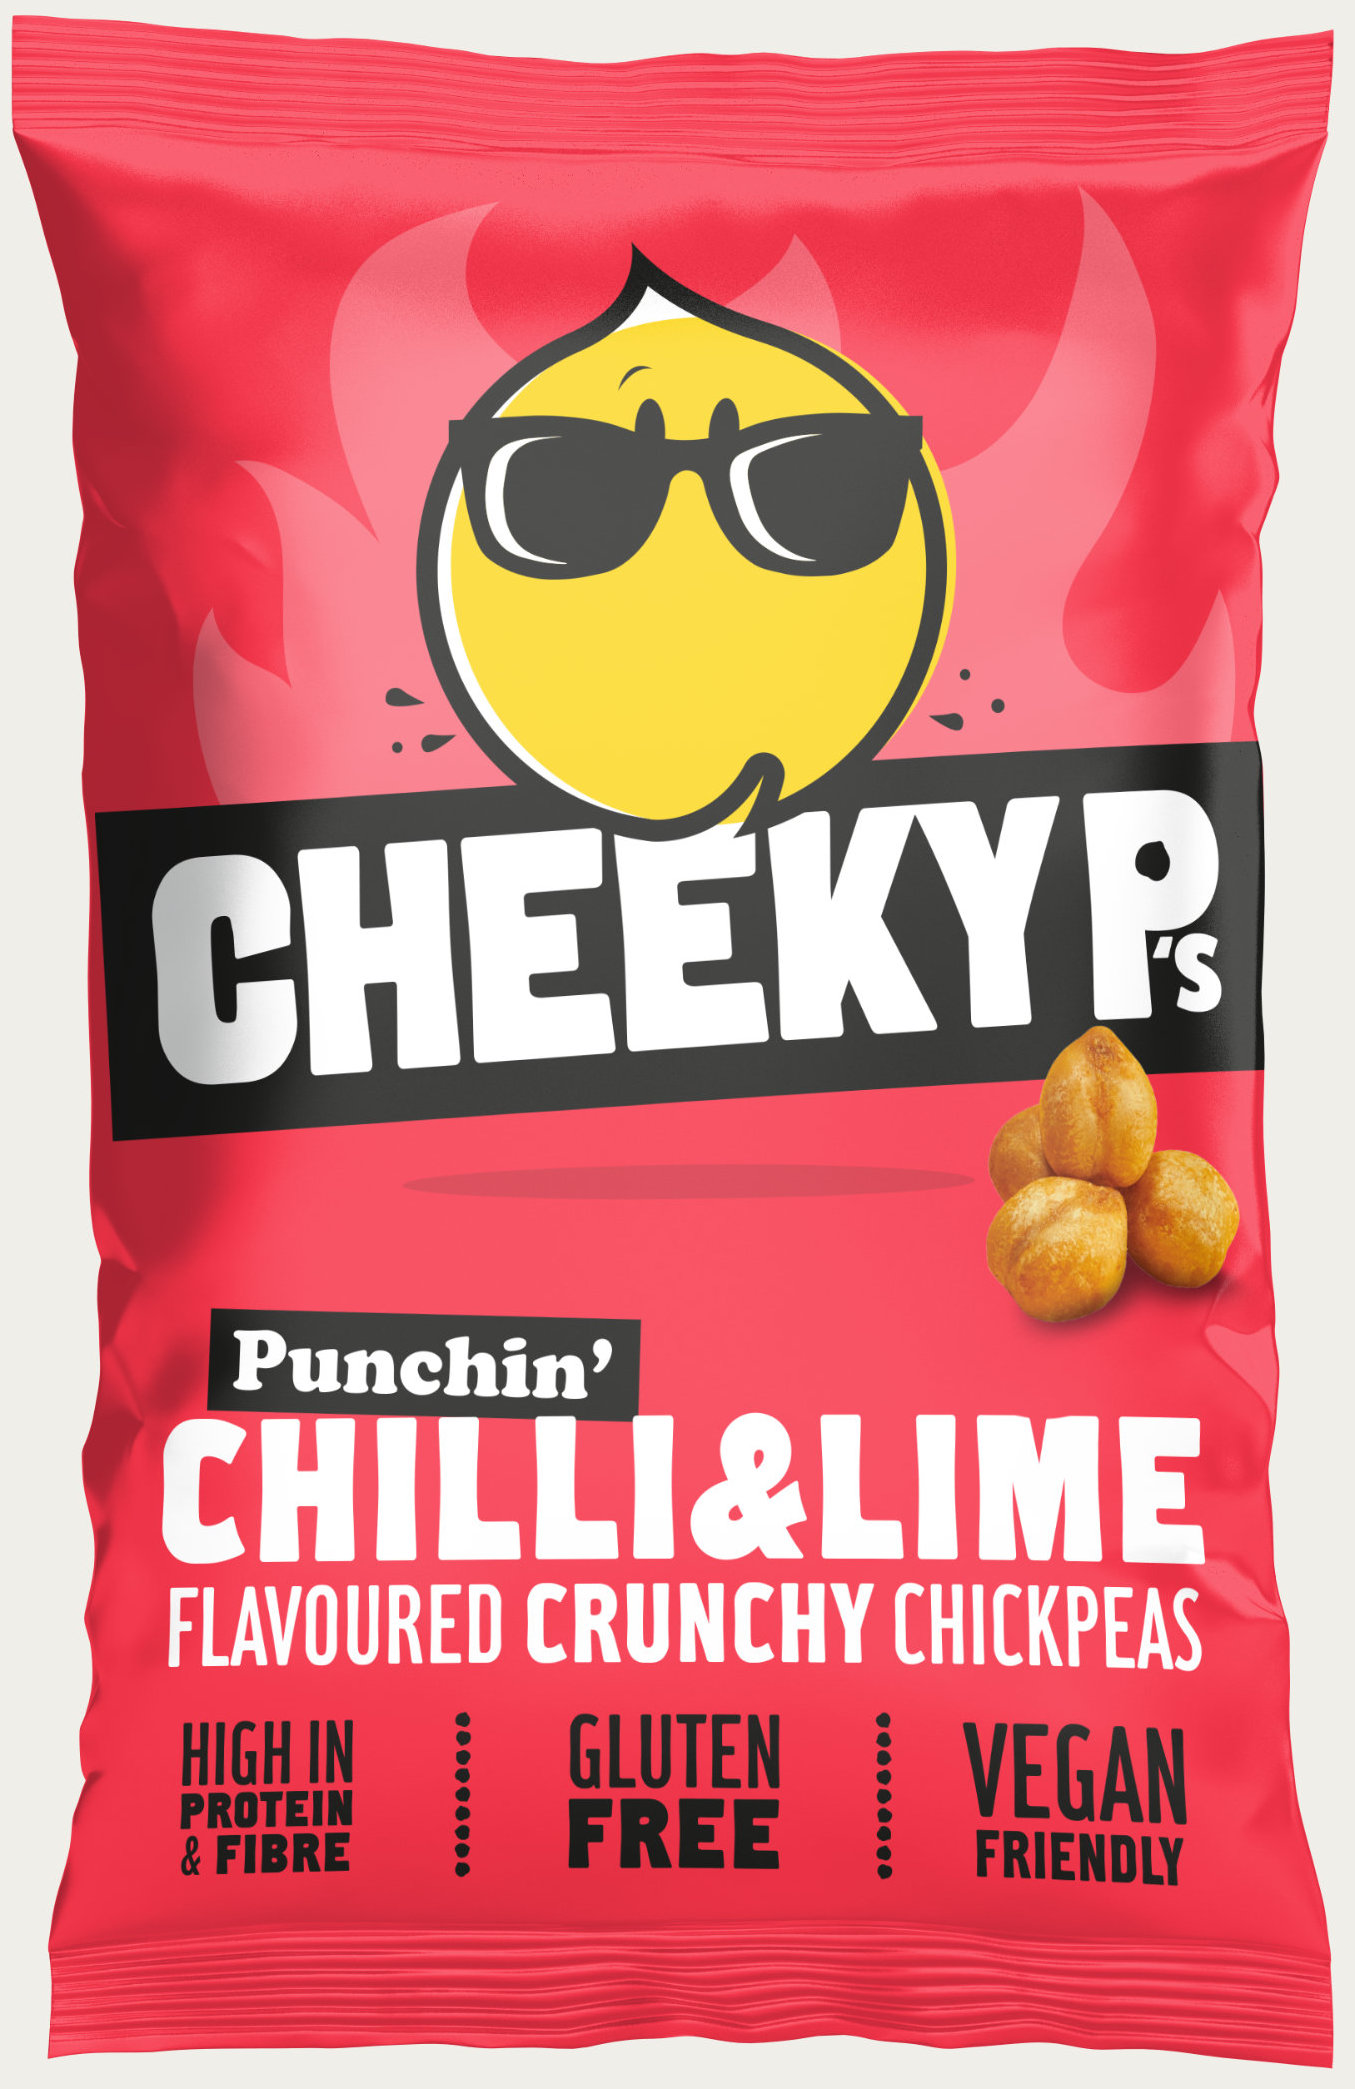 Cheeky P's chilli & lime